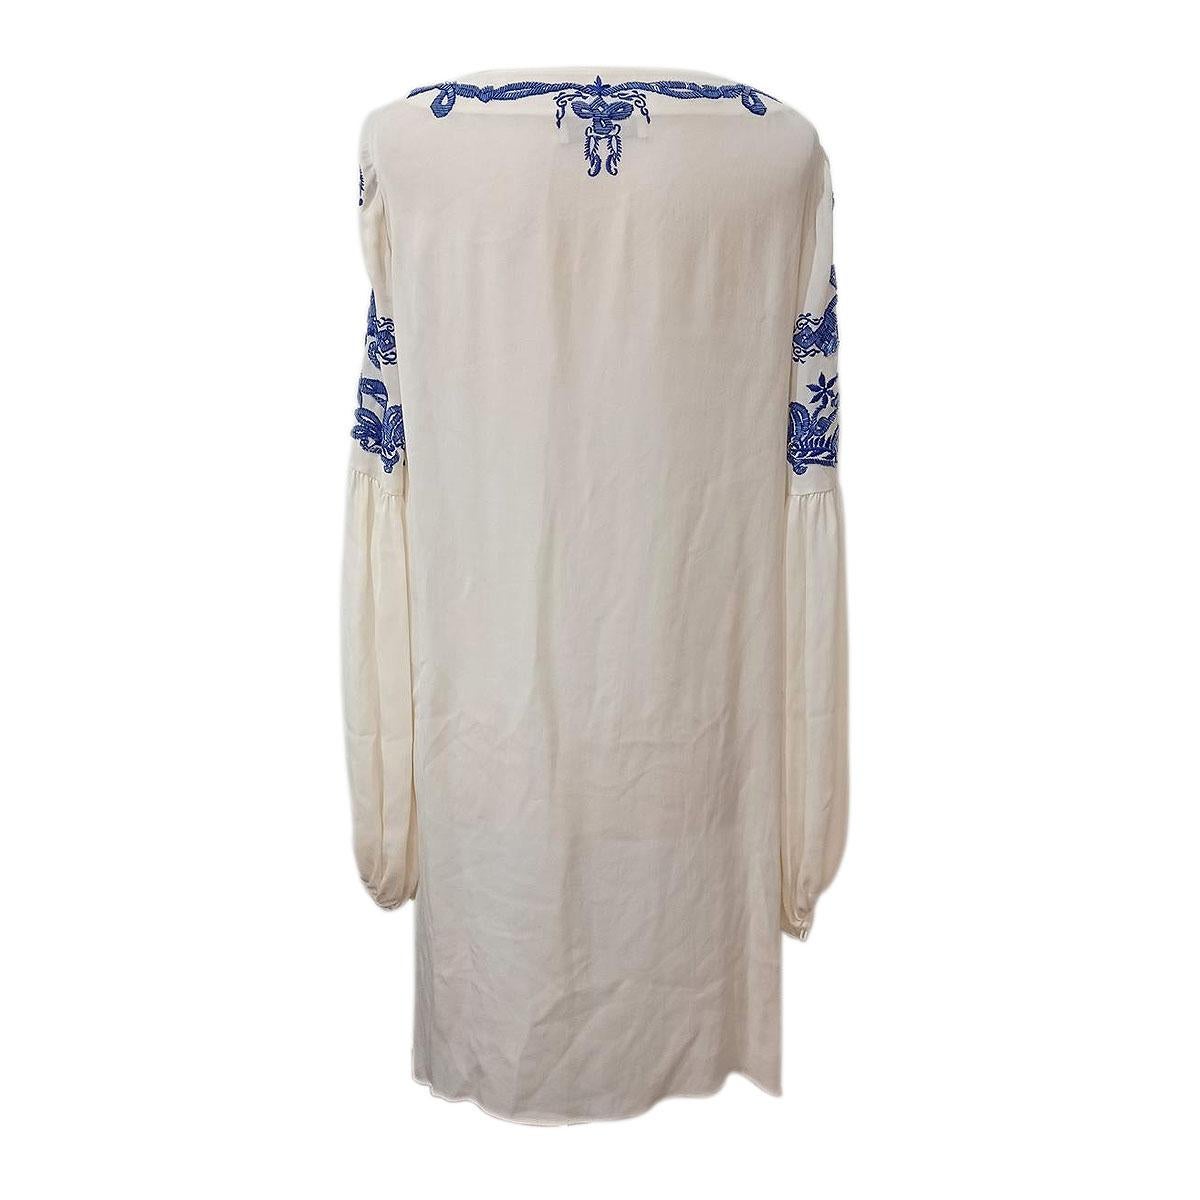 Beautiful blouse by Emilio Pucci
Blouse
Silk
Cream white color
Long wide sleeve
Embellished with blue embroidery and beads
Boat neckline
With belt (not in pictures)
Total lenght cm 90 (35,43 inches)
Worldwide express shipping included in the price !